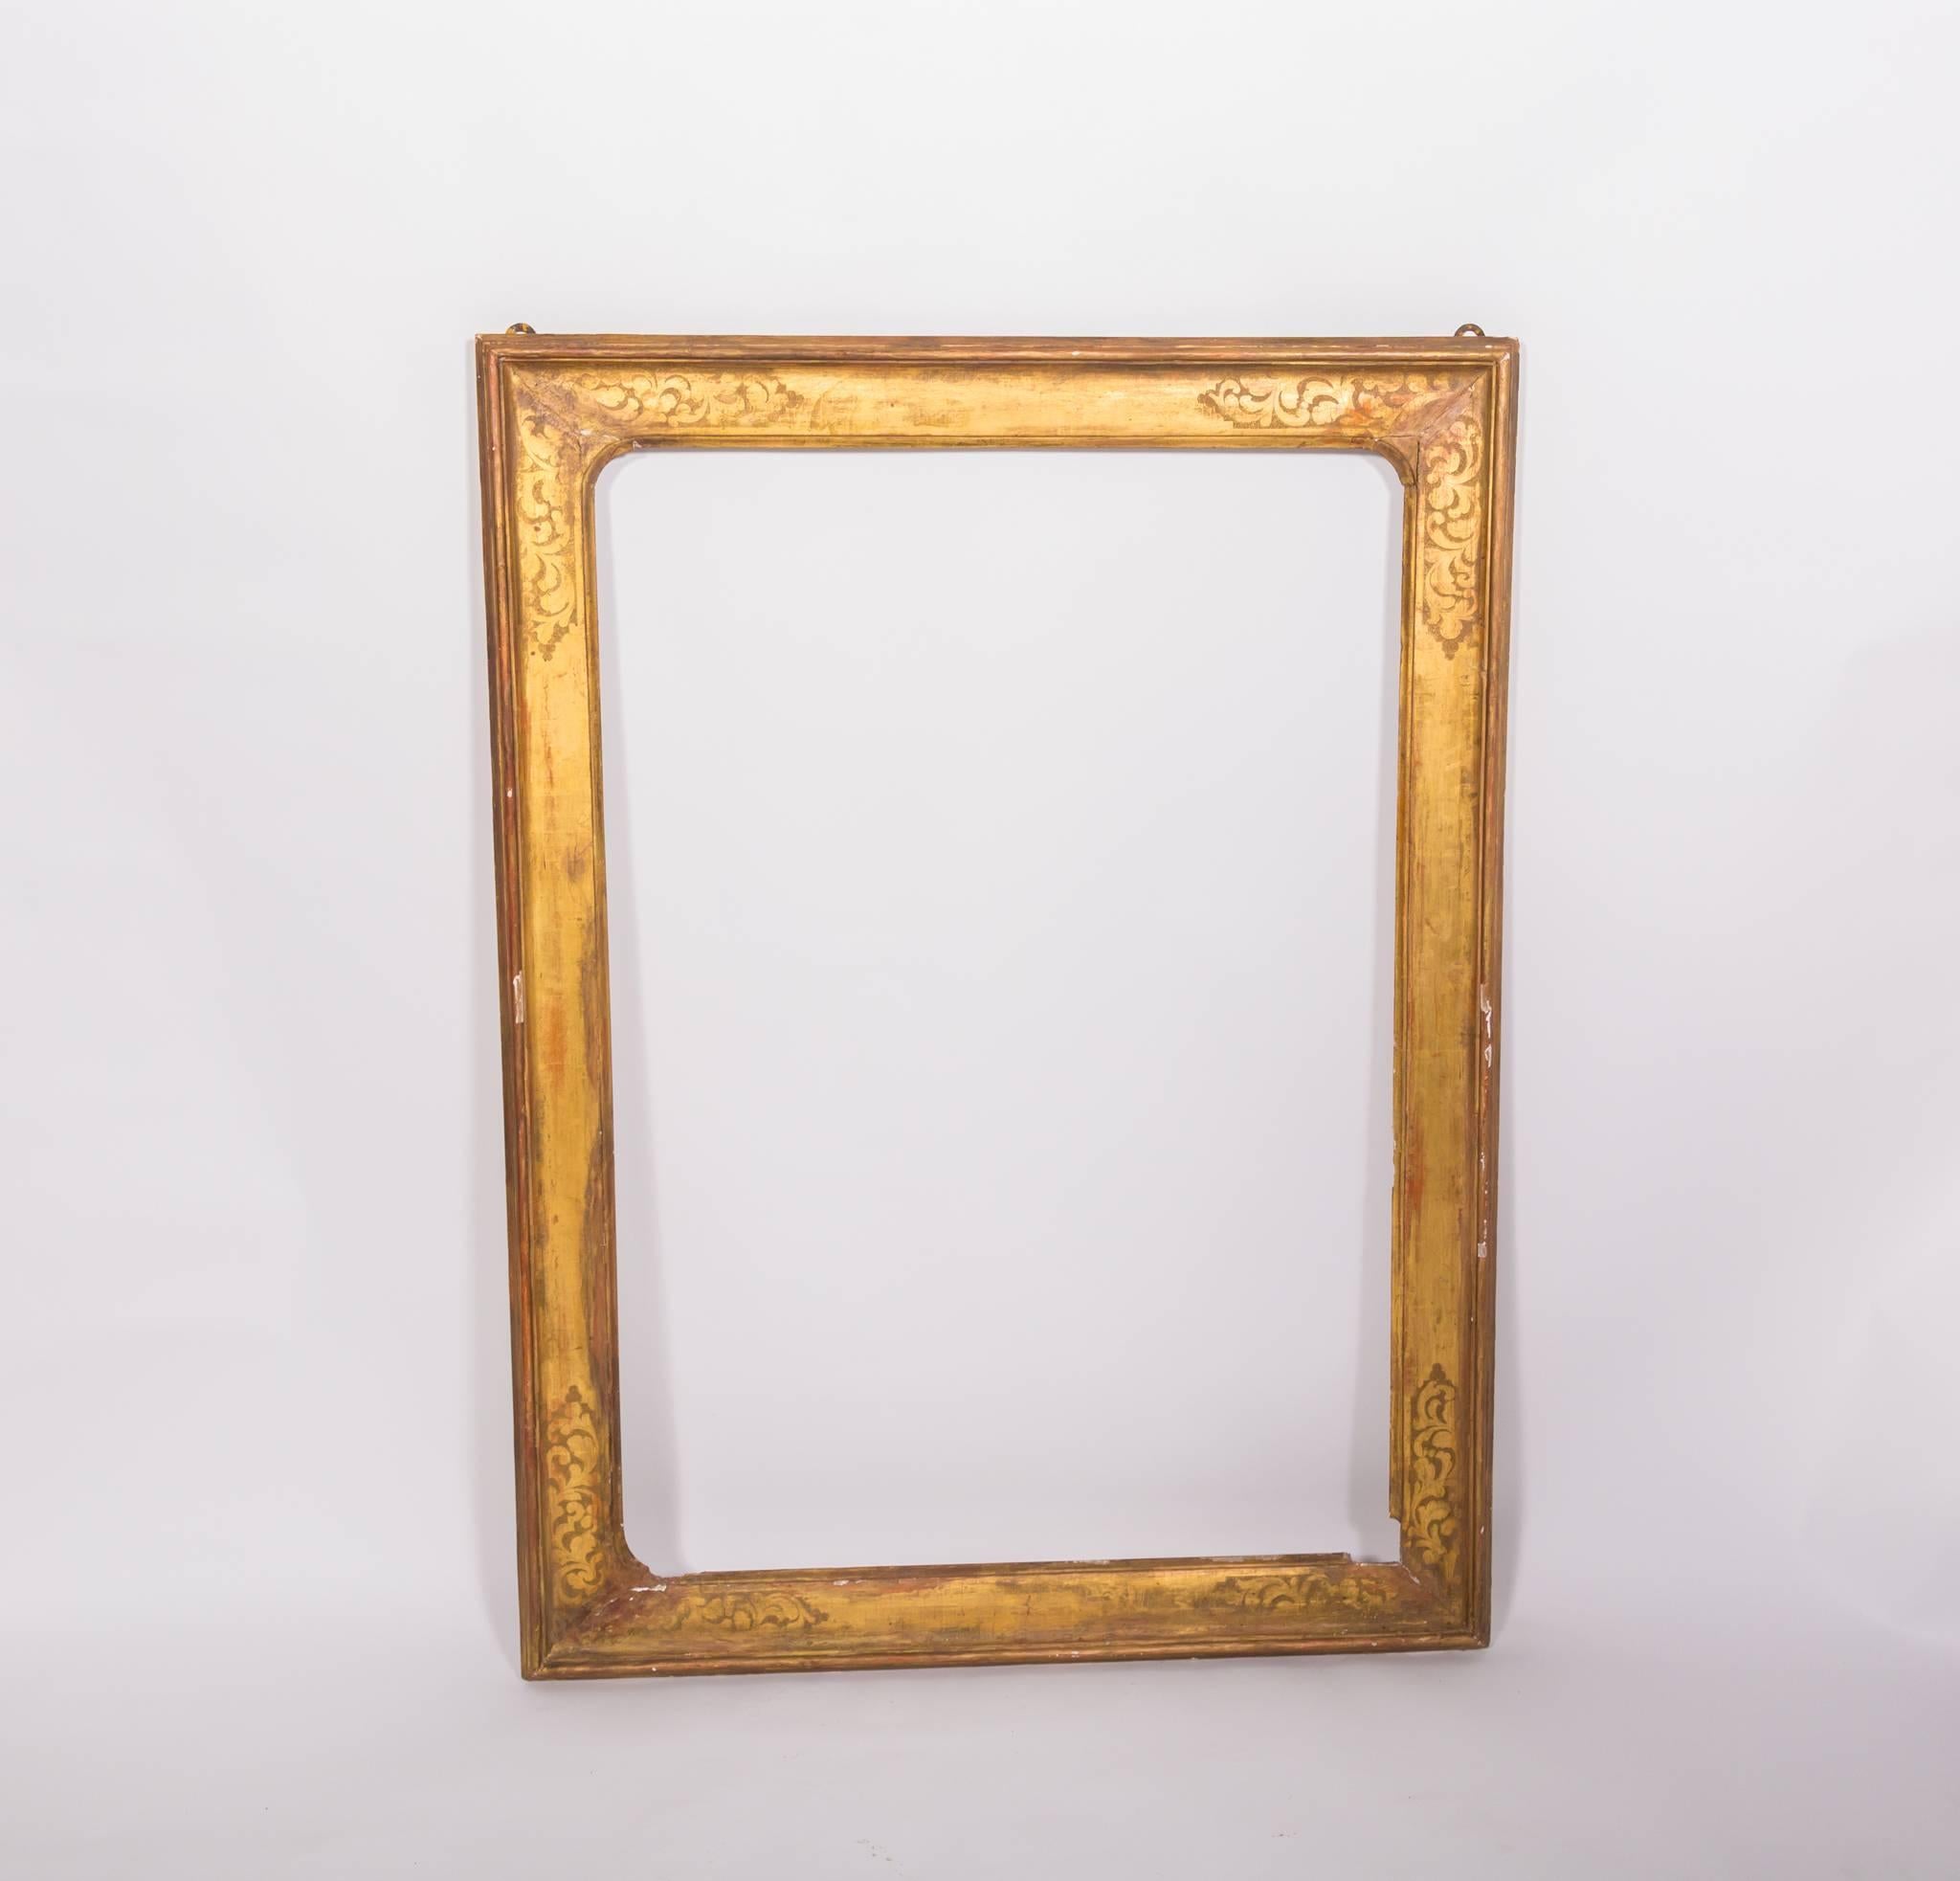 Beautifully etched wooden frame from Florence with original gilding.